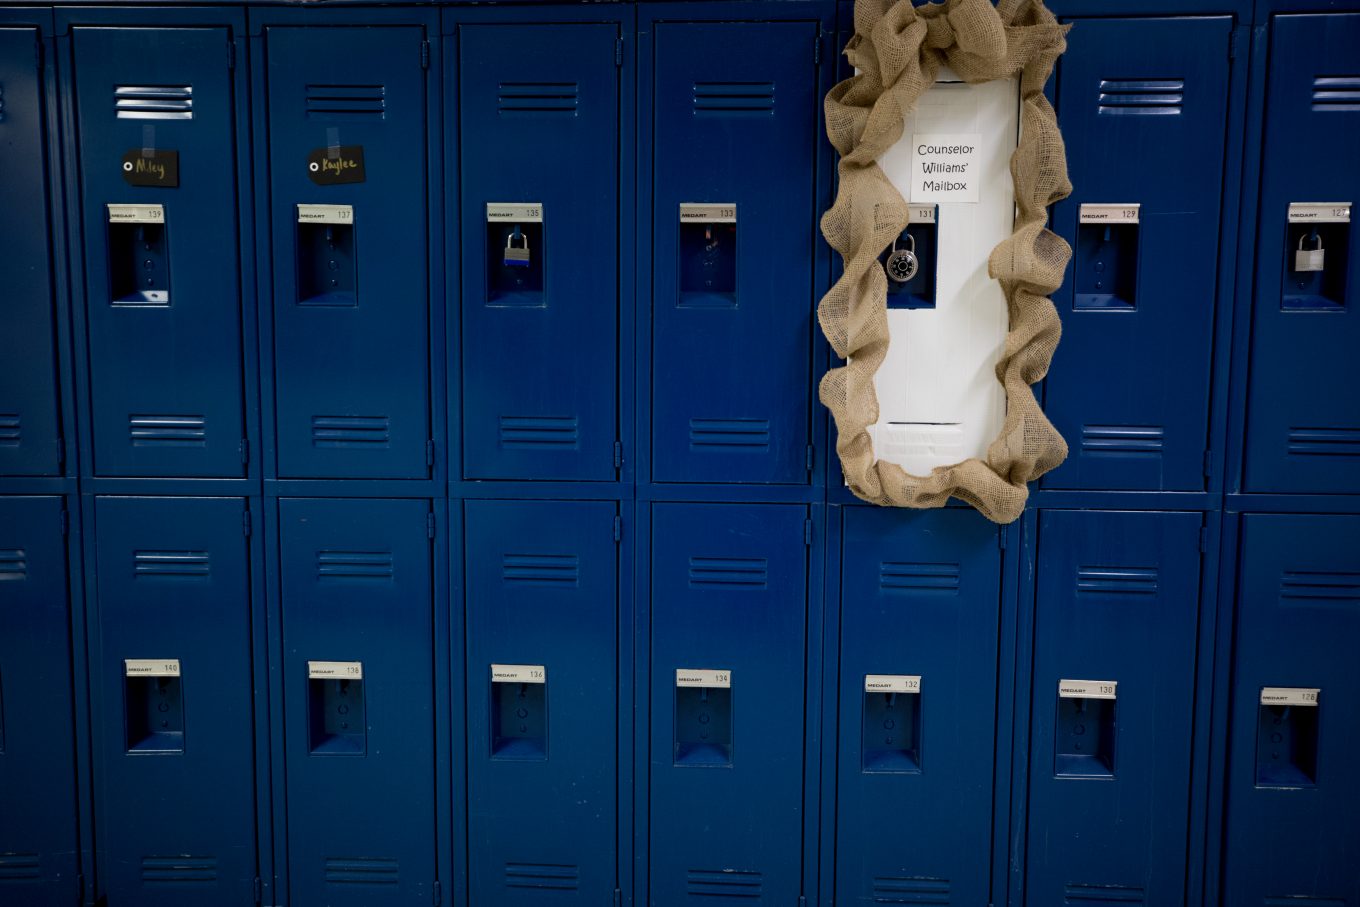 locker where students can send her private notes.